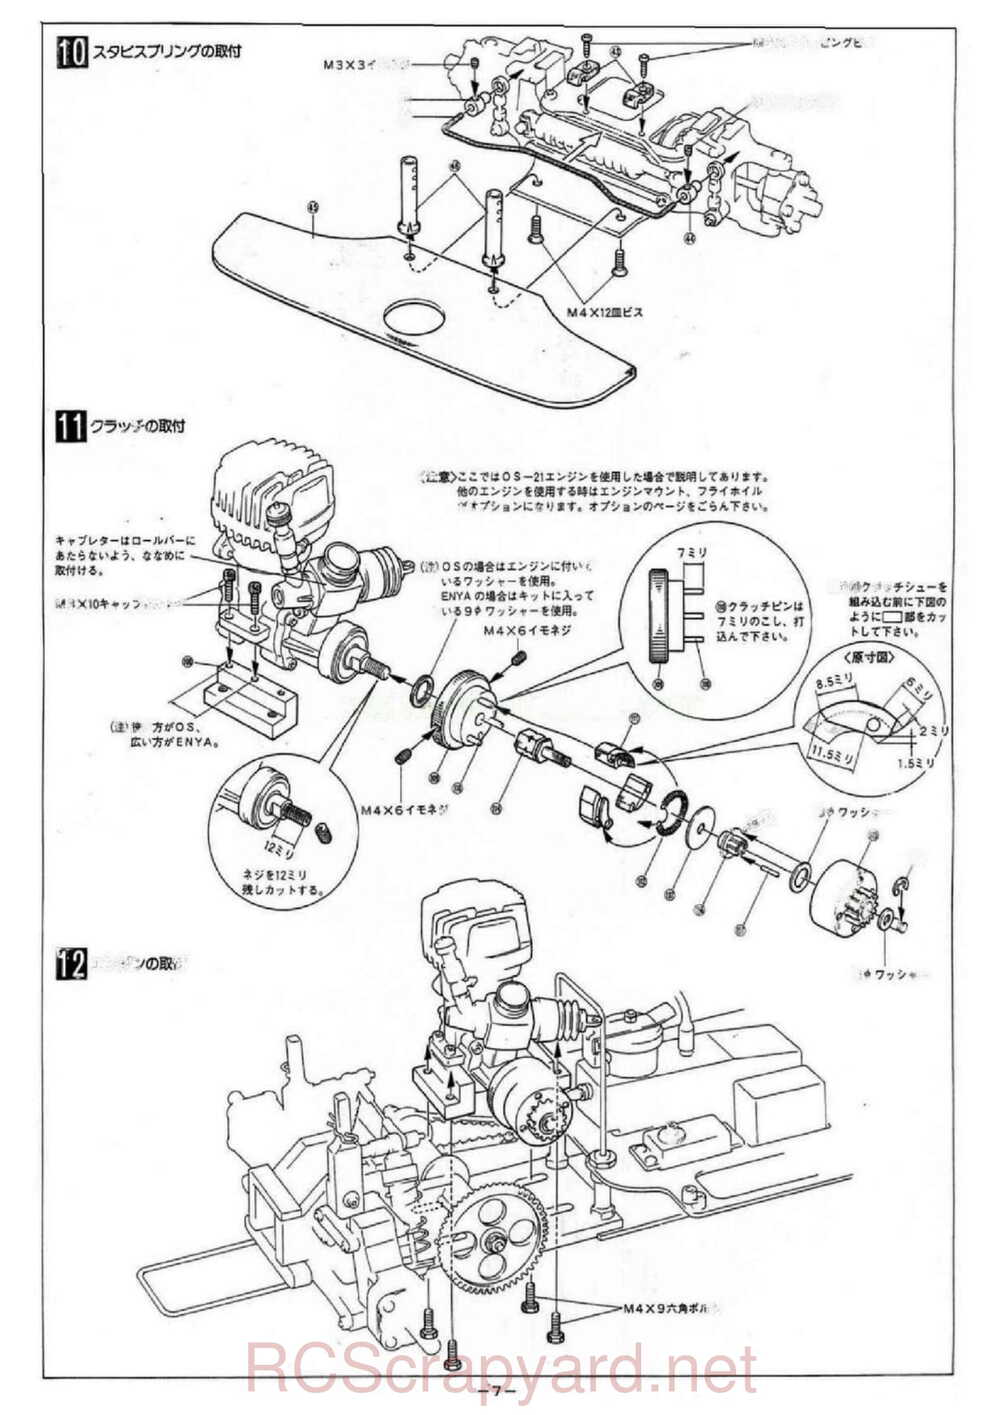 Kyosho - 3121 - Fantom-21 4iS - Manual - Page 07